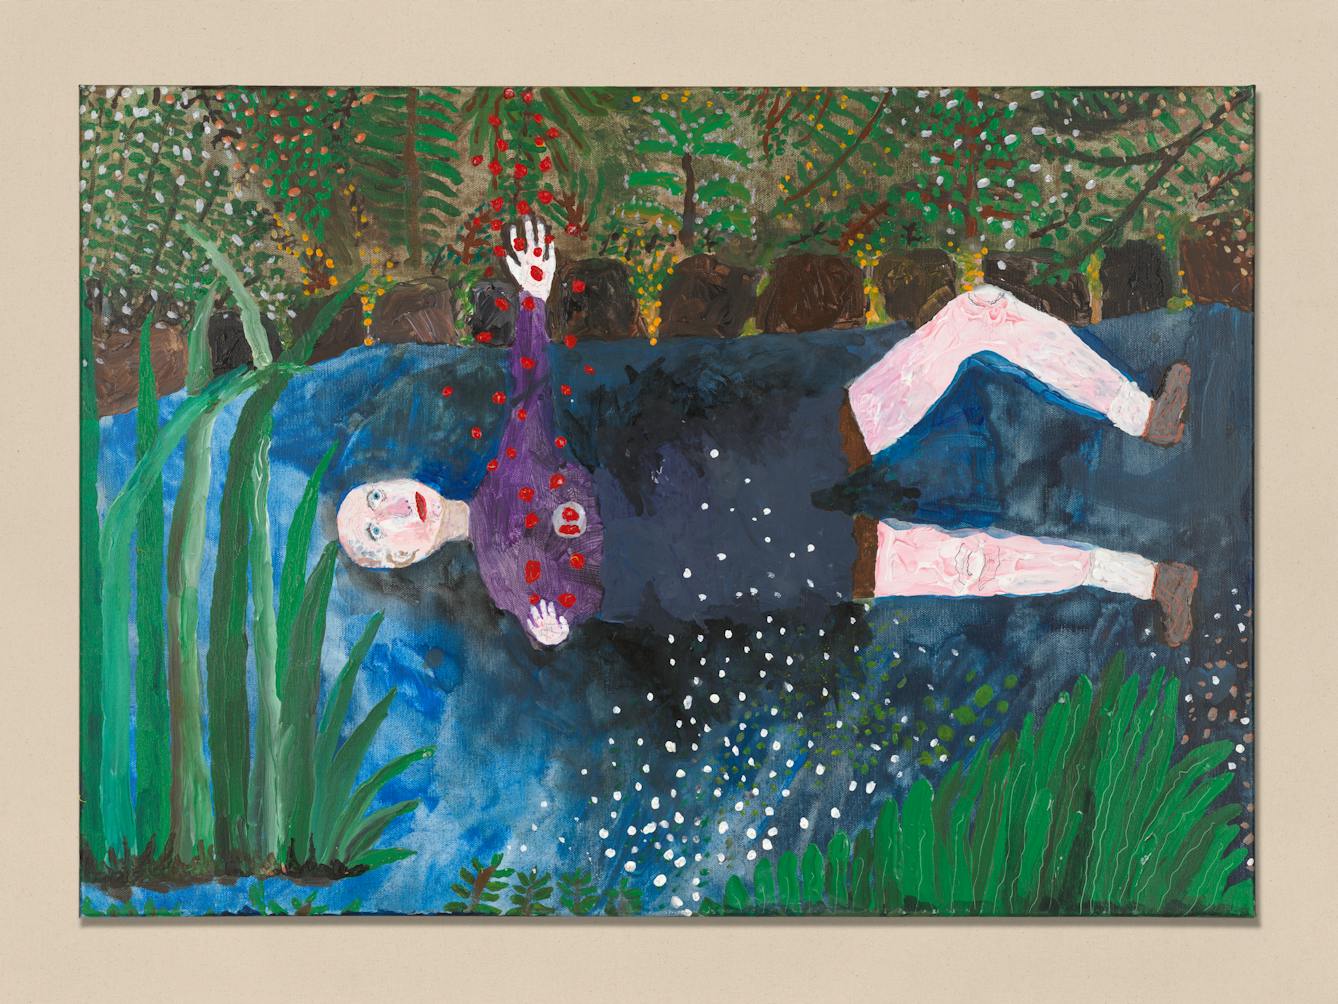 Acrylic on canvas artwork by Chris Miller titled ‘Me as Ophelia’. In the artwork a man is laying in a stream, surrounded by woods. The man is reaching upwards to some falling red dots.